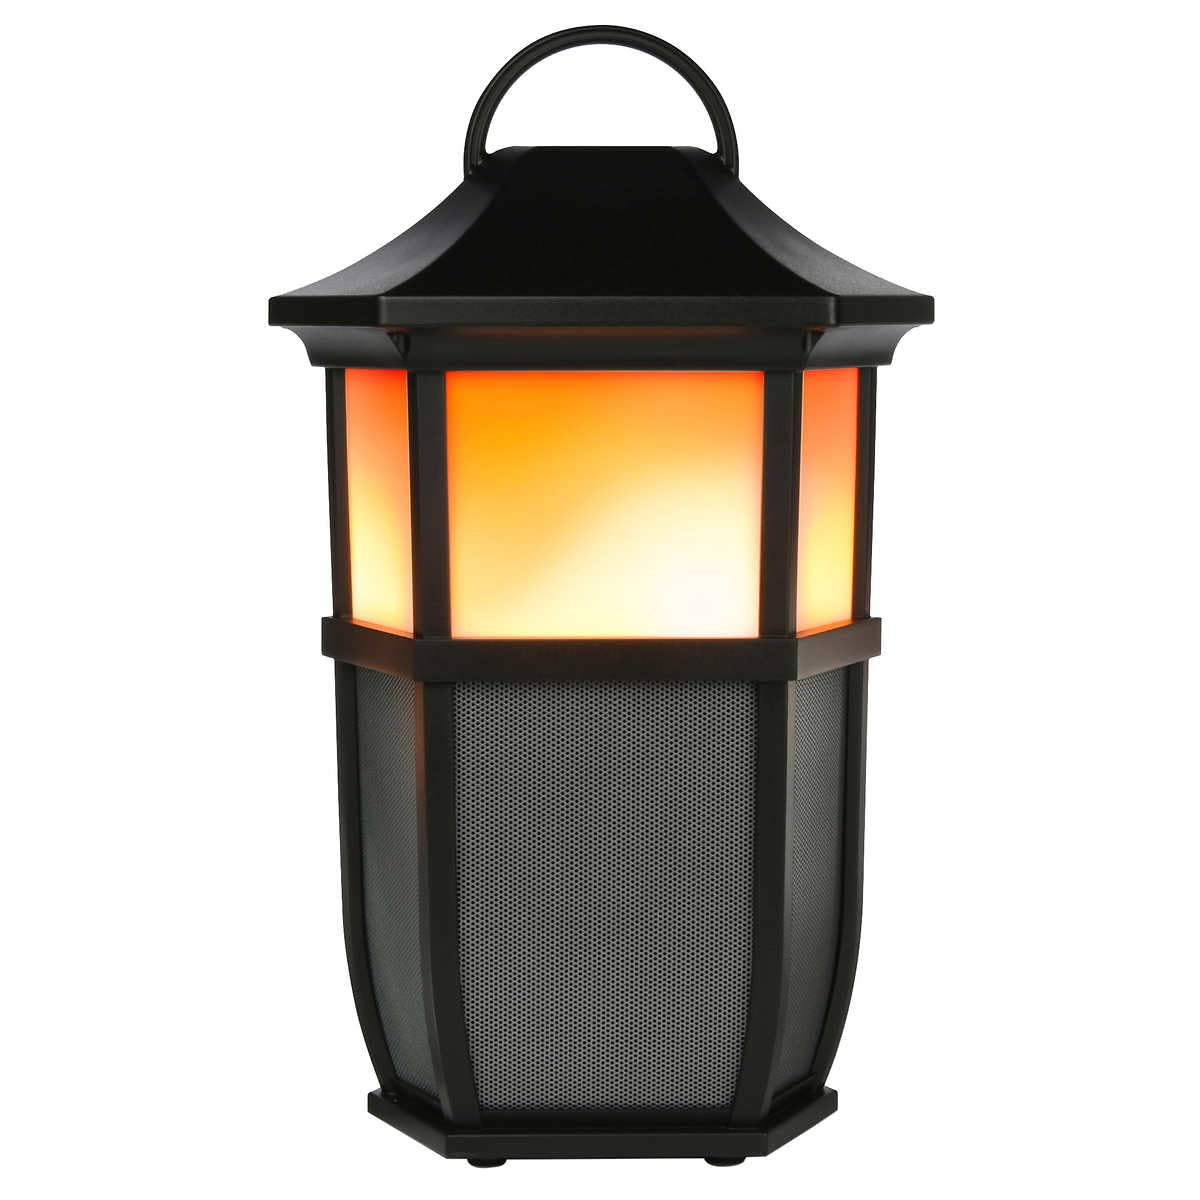 Acoustic Research Portable Outdoor Wireless Speaker with Led Flickering Flame Light